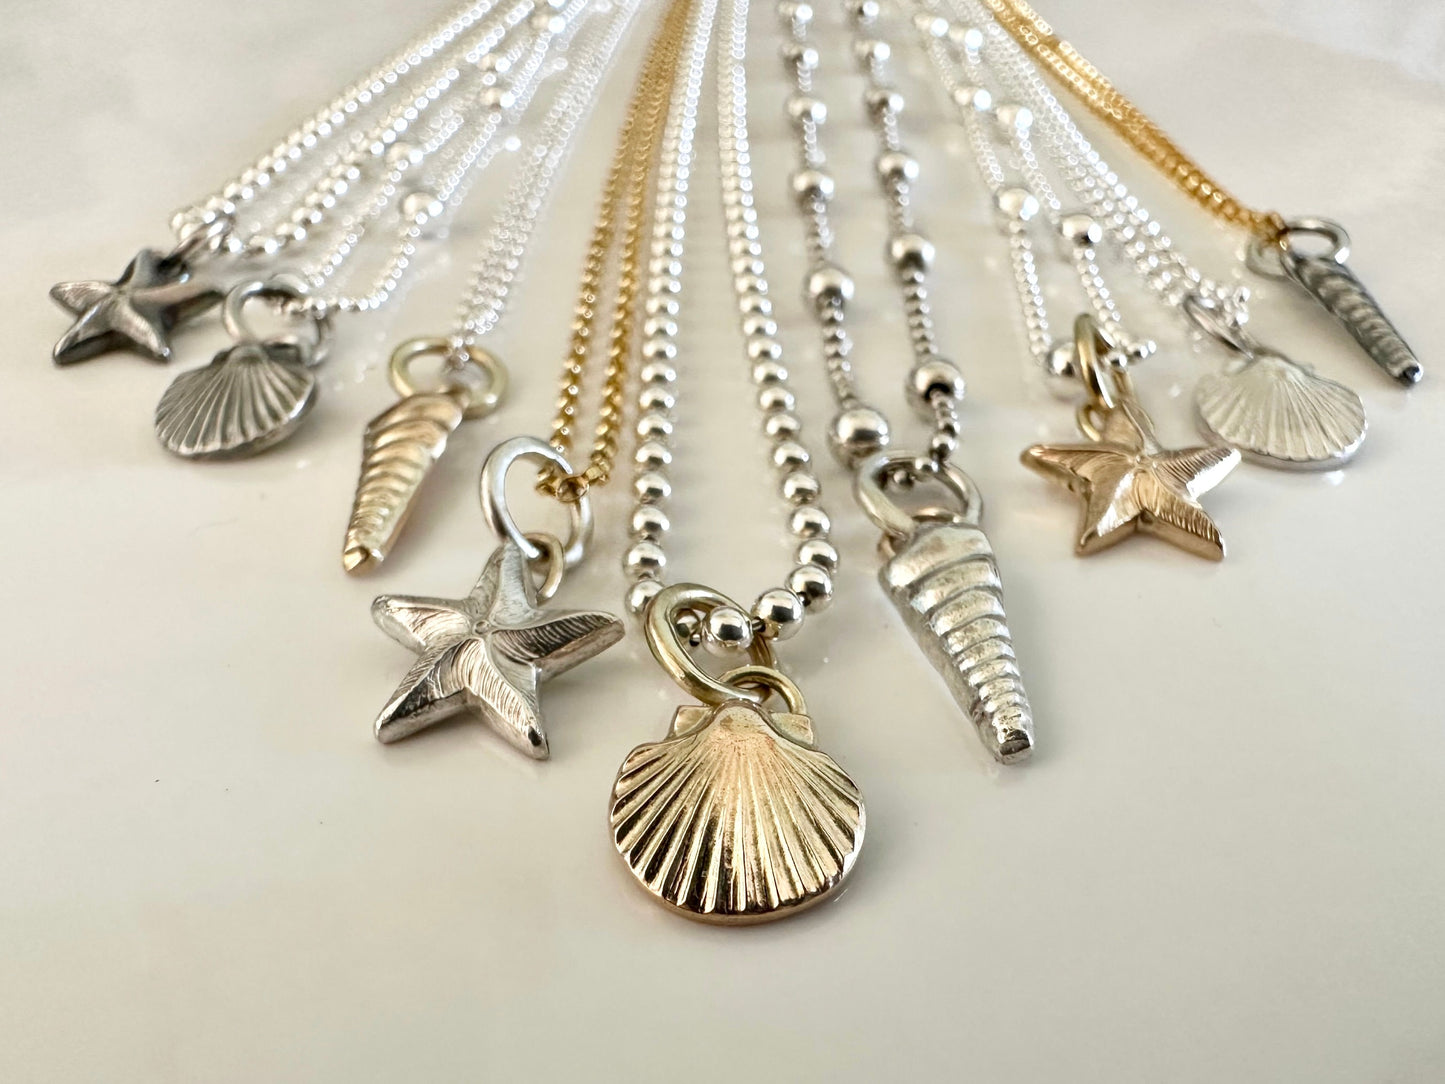 Solid 9ct gold Starfish pendant charm necklace, handmade from recycled 9ct gold, made to order